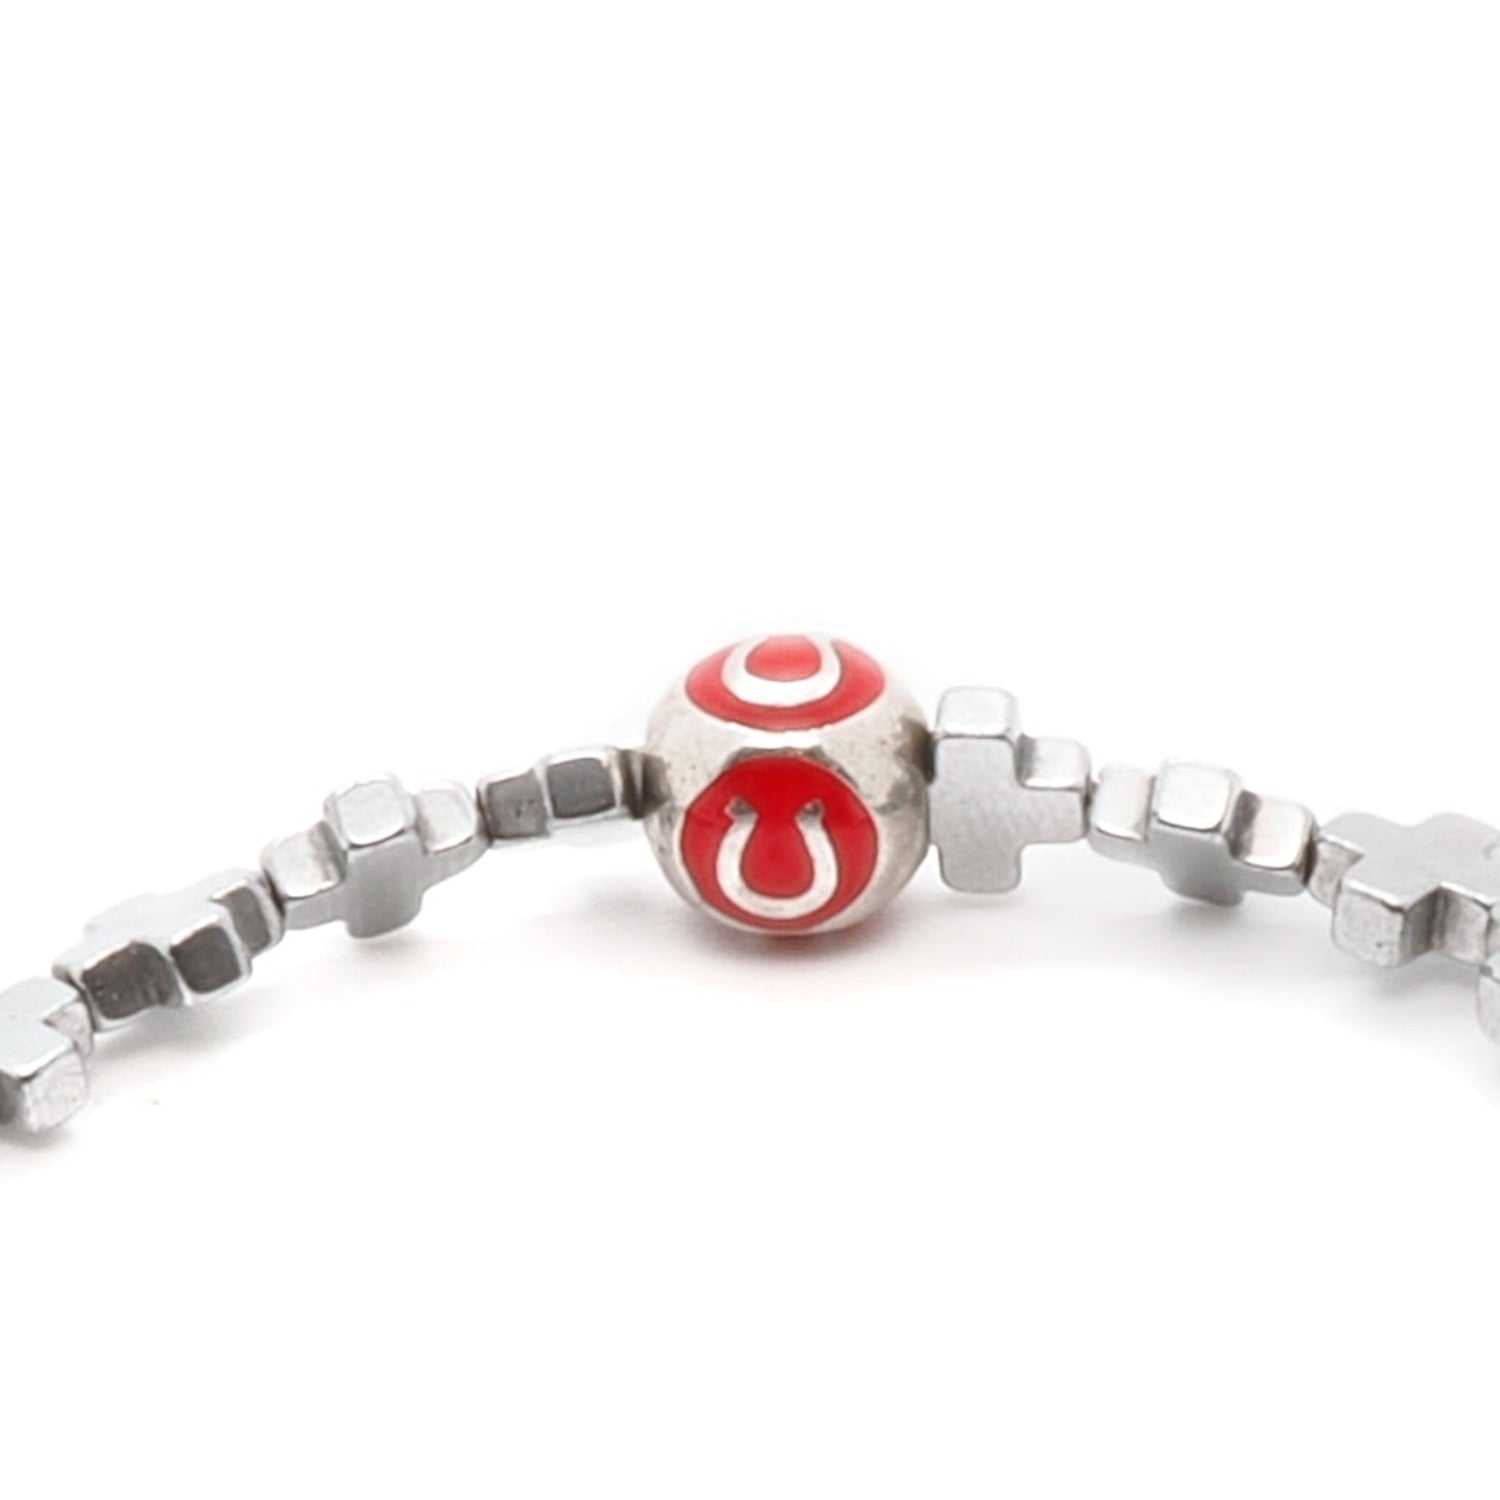 Experience the positive energy of the Silver Color Lucky Charms Bracelet, crafted with silver hematite stones and meaningful sterling silver charms.